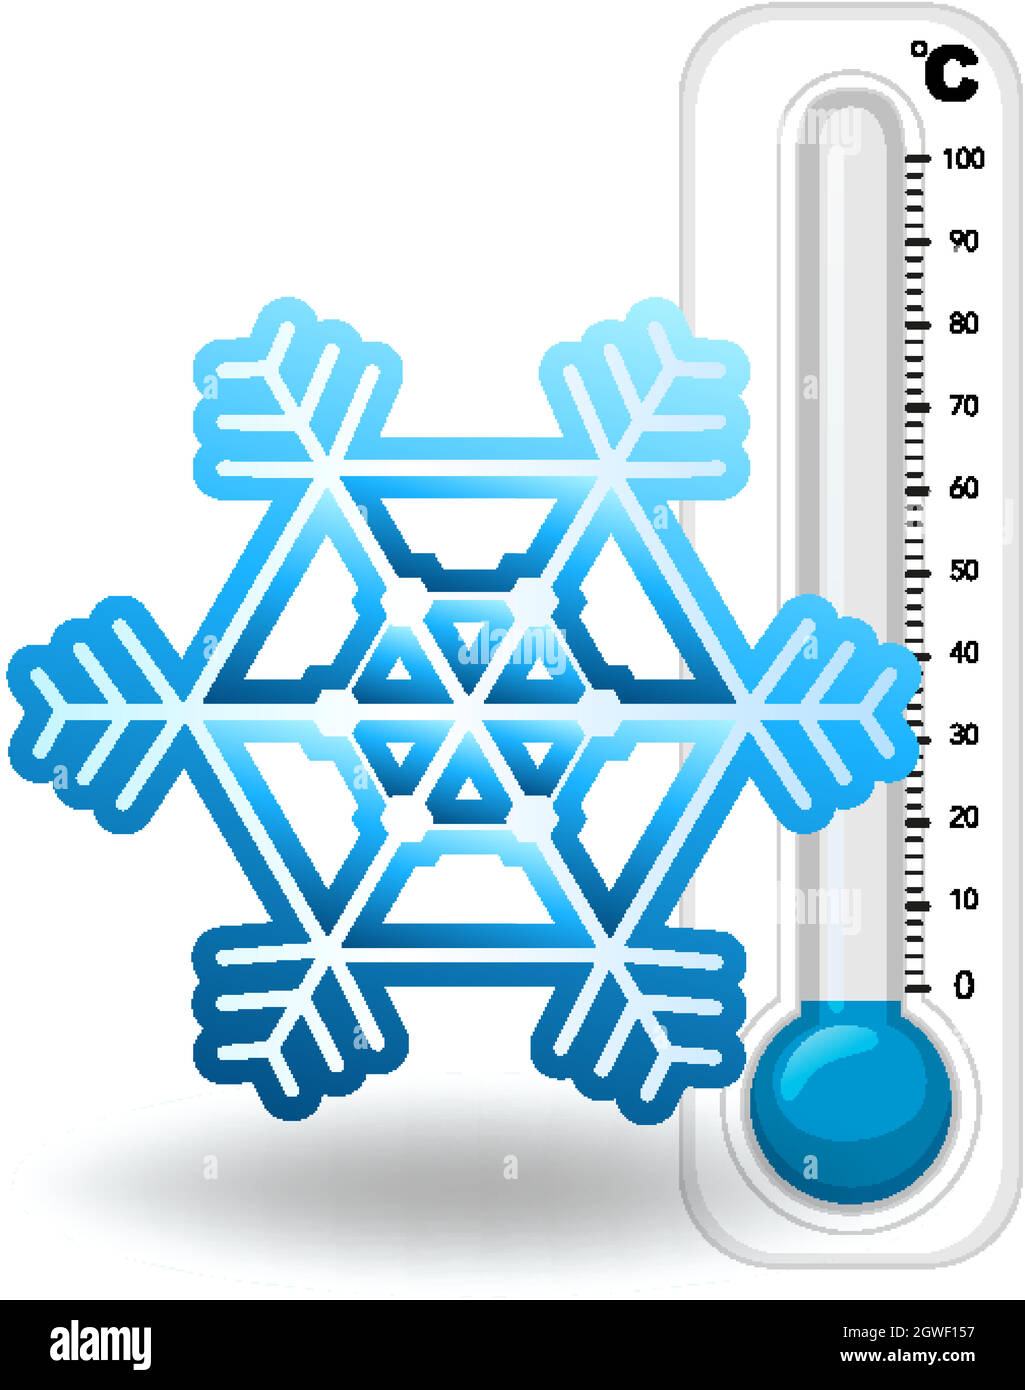 https://c8.alamy.com/comp/2GWF157/thermometer-and-snowflake-on-white-background-2GWF157.jpg